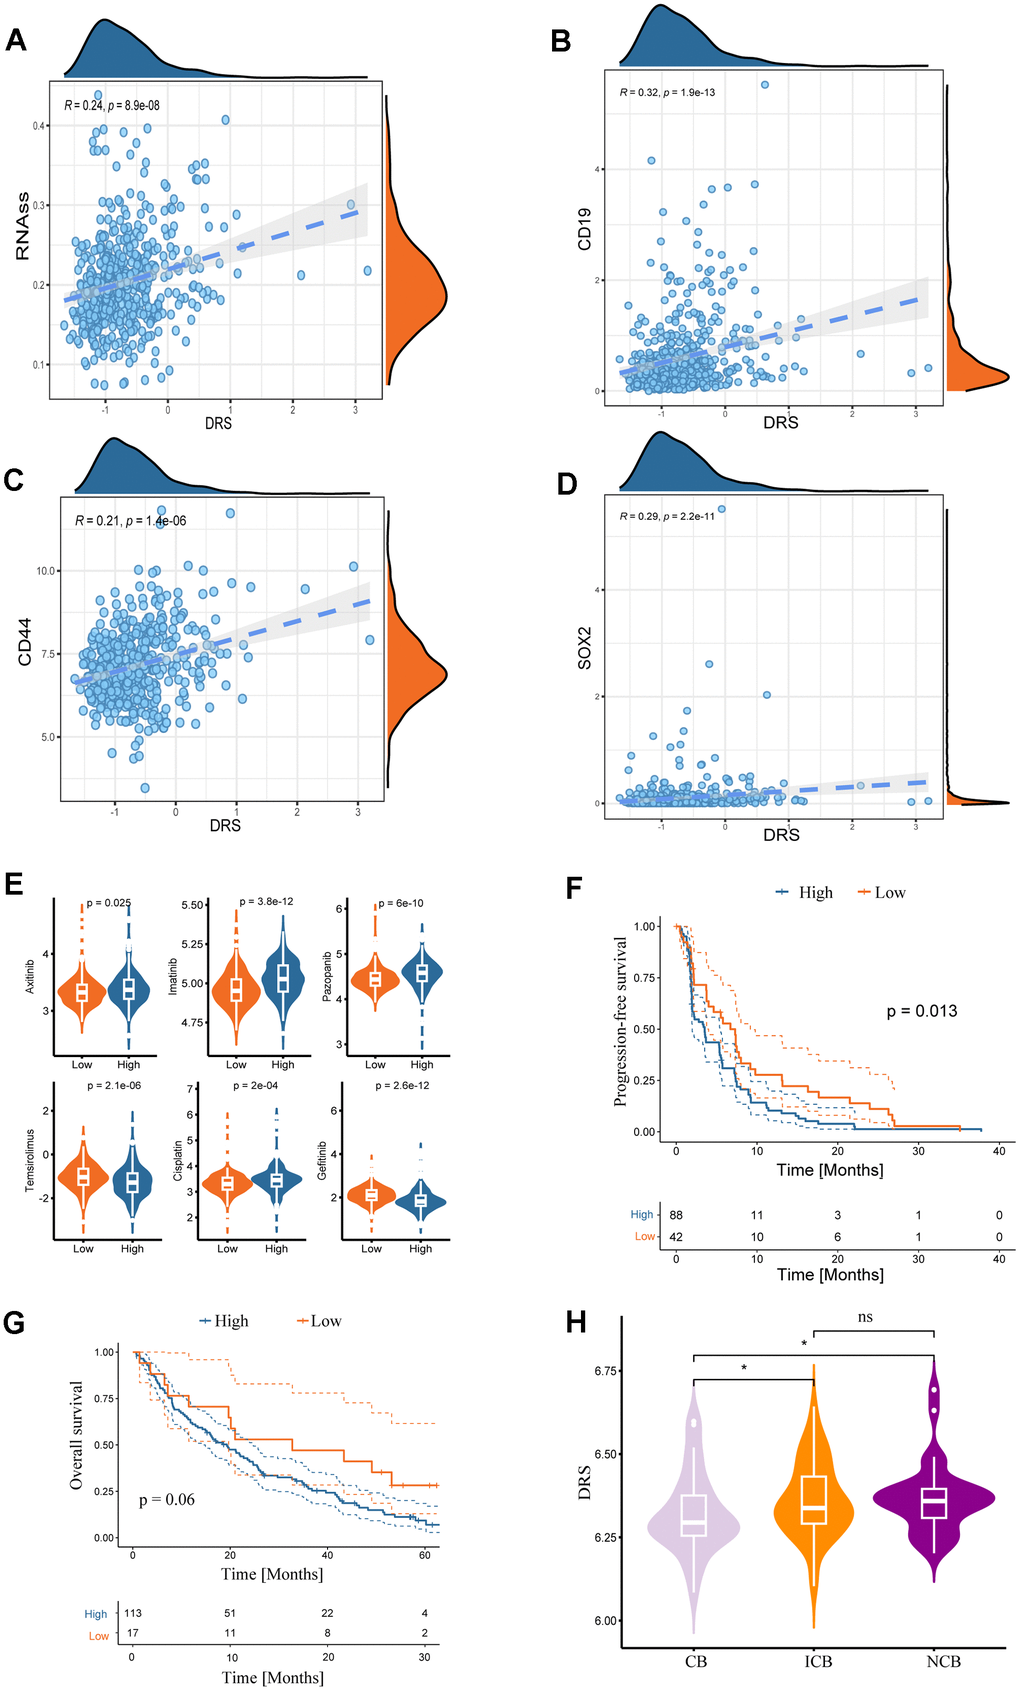 Associations between DRS and stemness index and clinical drug treatment responses. Correlation analysis of DRS with RNA stem score (A) and renal cancer stem cell markers (CD19, CD44, and SOX2) (B–D). Statistical significance was set at p  0.05. (E) Boxplots of the estimated IC50 values of chemotherapeutic and targeted agents in the high- and low-DRS groups, including axitinib, imatinib, pazopanib, temsirolimus, cisplatin, and gefitinib. (F, G) Survival analysis for progression-free survival and overall survival of the two DRS groups in patients with ccRCC who were treated with everolimus from the RCC-Braun